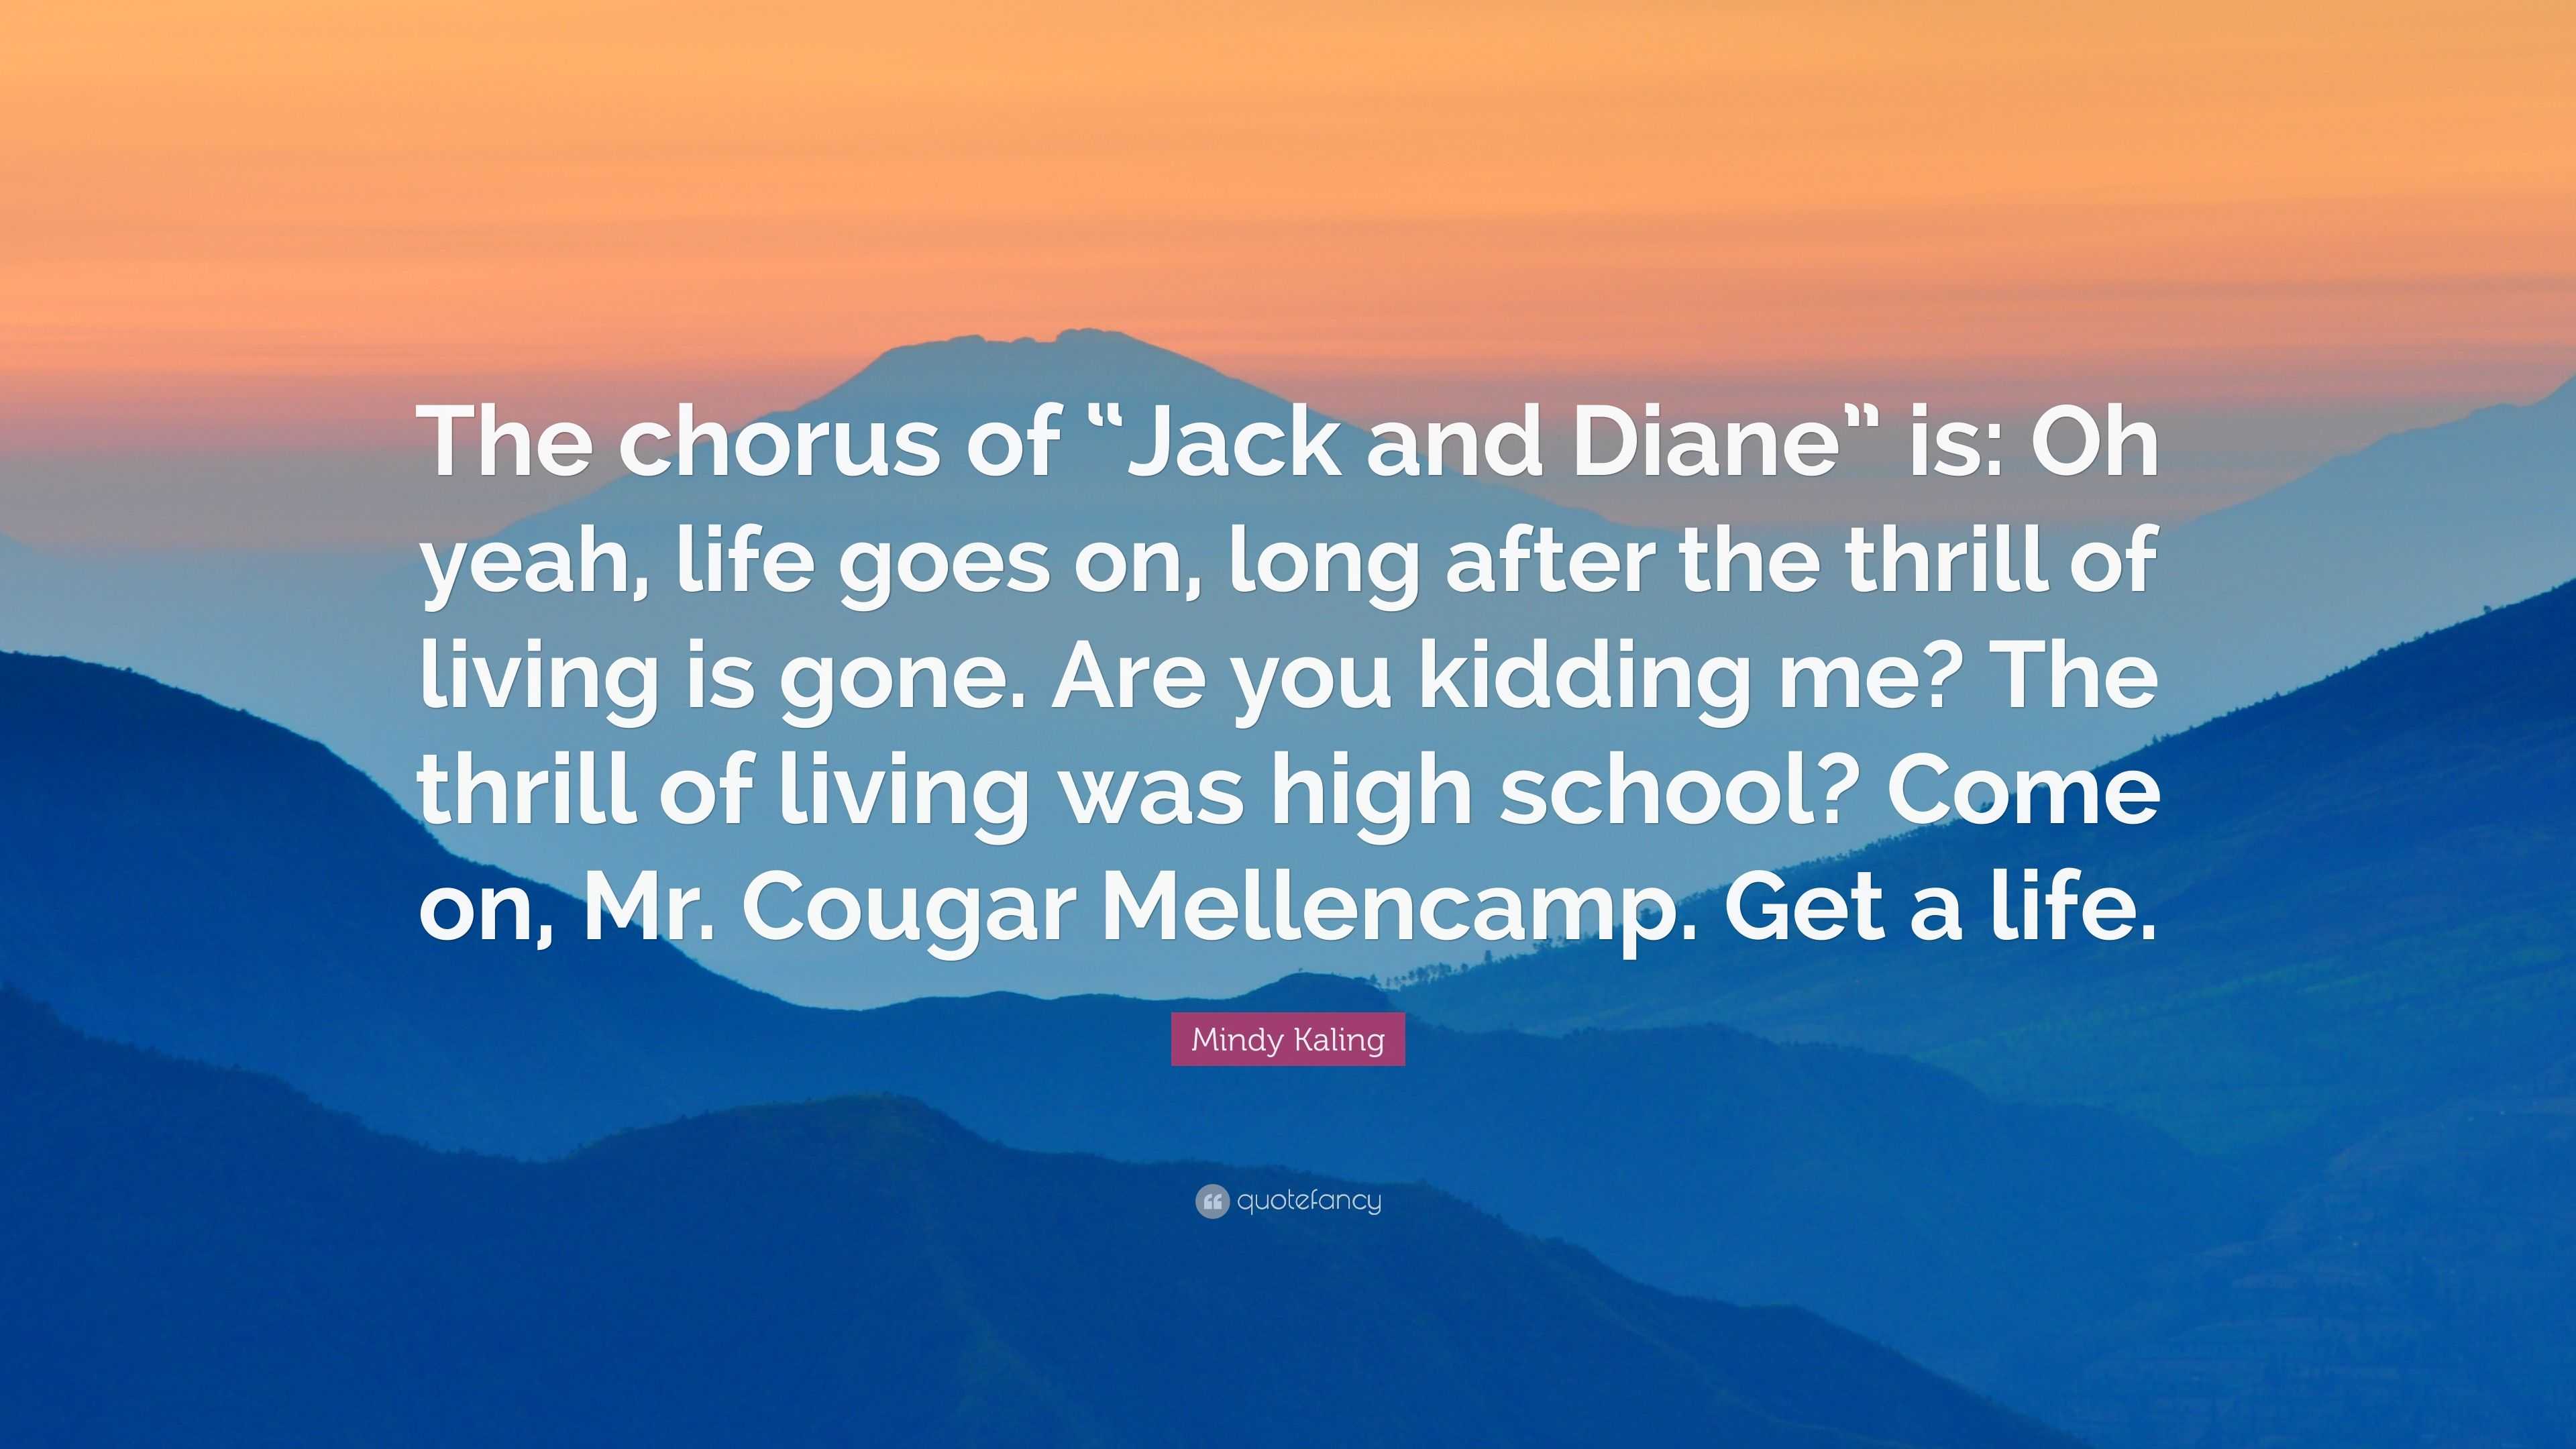 Mindy Kaling Quote “The chorus of “Jack and Diane” is Oh